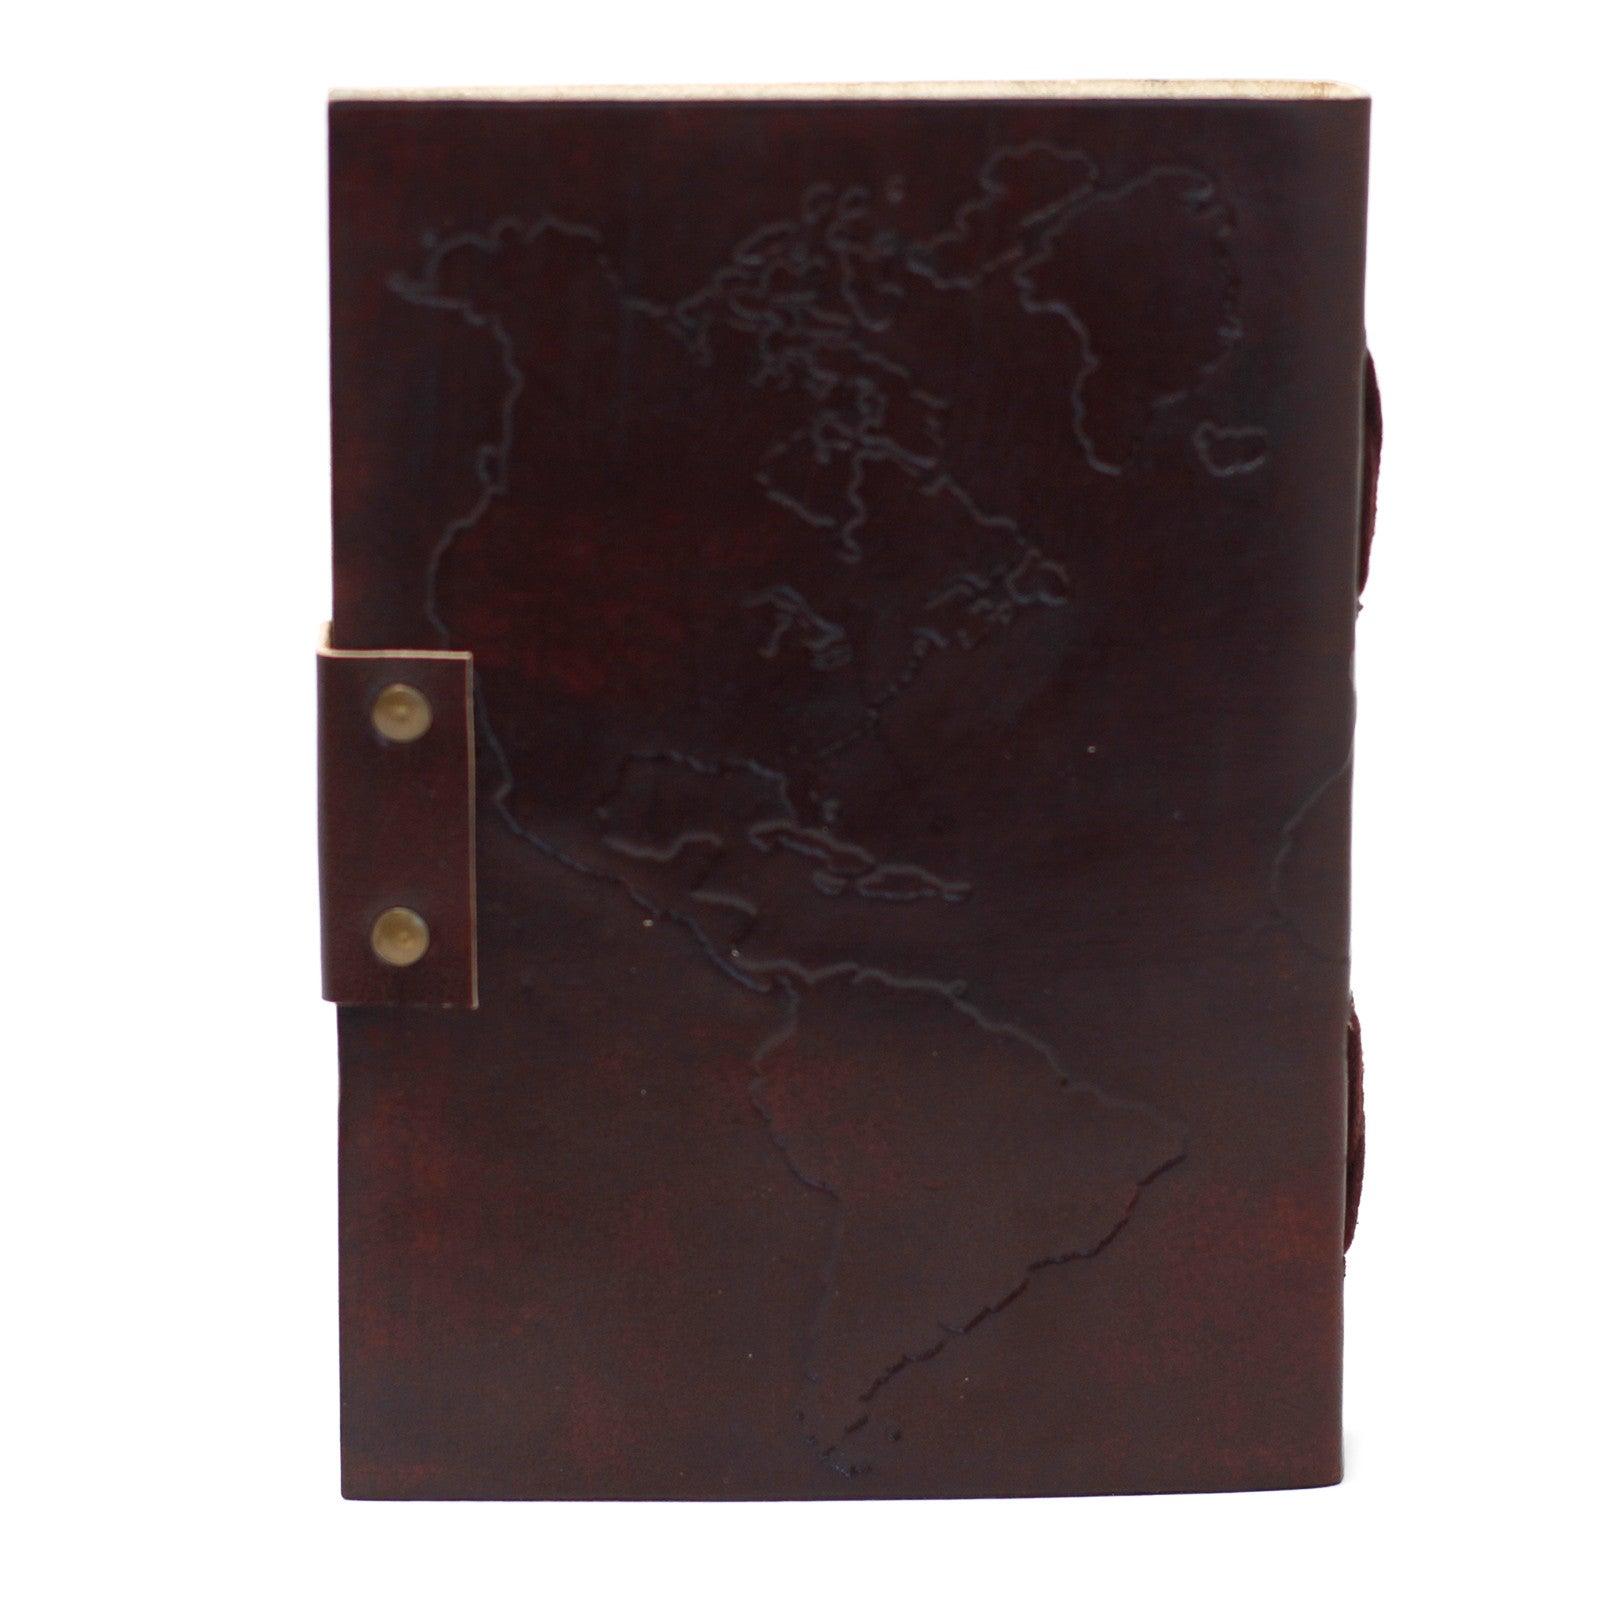 Leather World Map & Stitching Notebook (7x5") - DuvetDay.co.uk